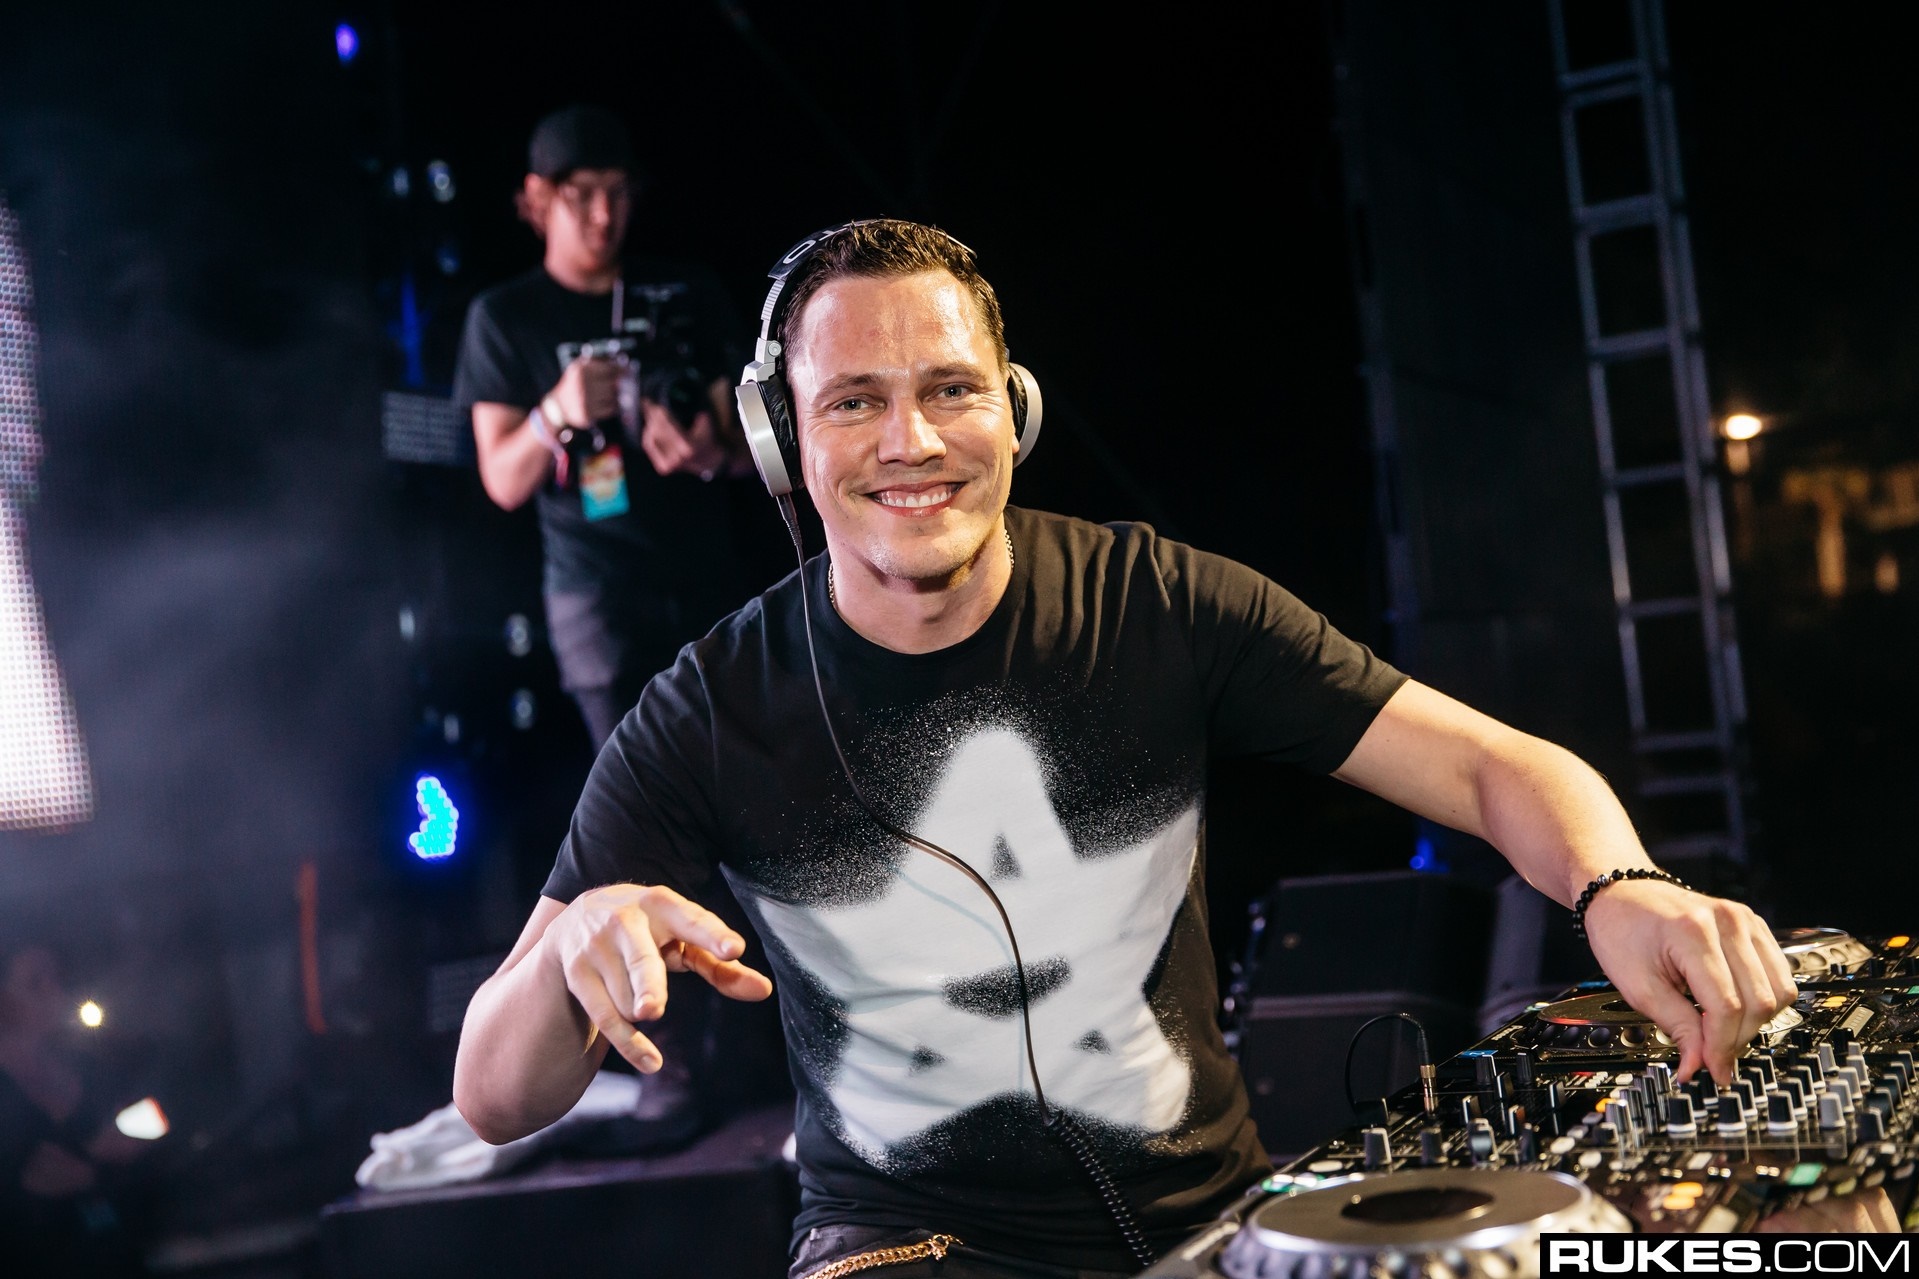 Dj Tiesto Backgrounds, Compatible - PC, Mobile, Gadgets| 1919x1279 px